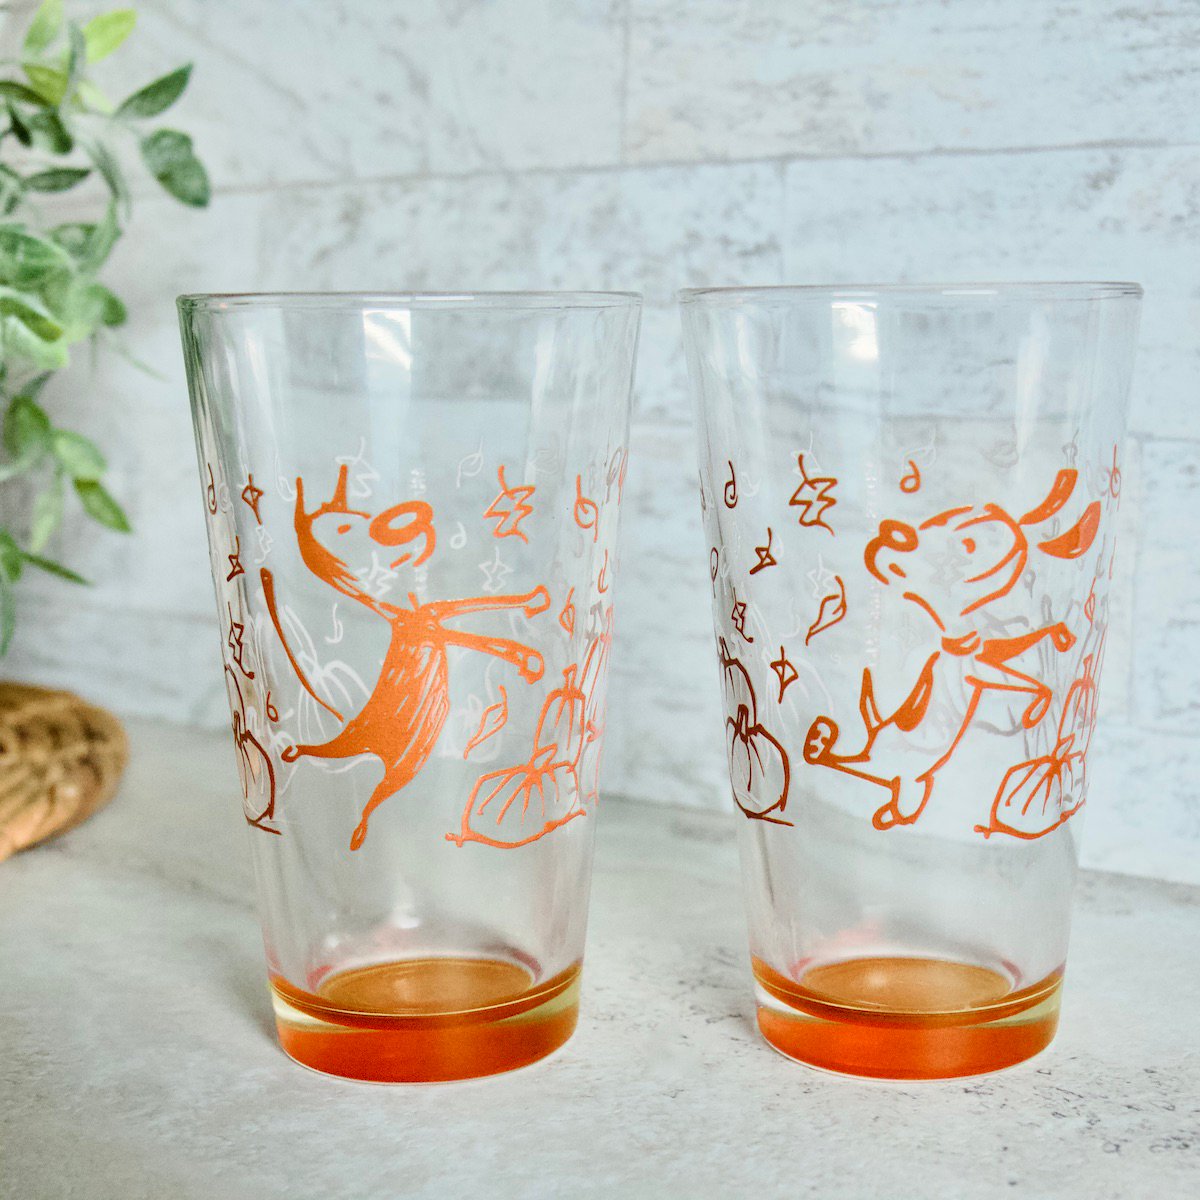 In case you missed it: Our newest pint glass set has arrived, just in time for autumn gatherings and family celebrations! Fetch yours here: bit.ly/46Budek